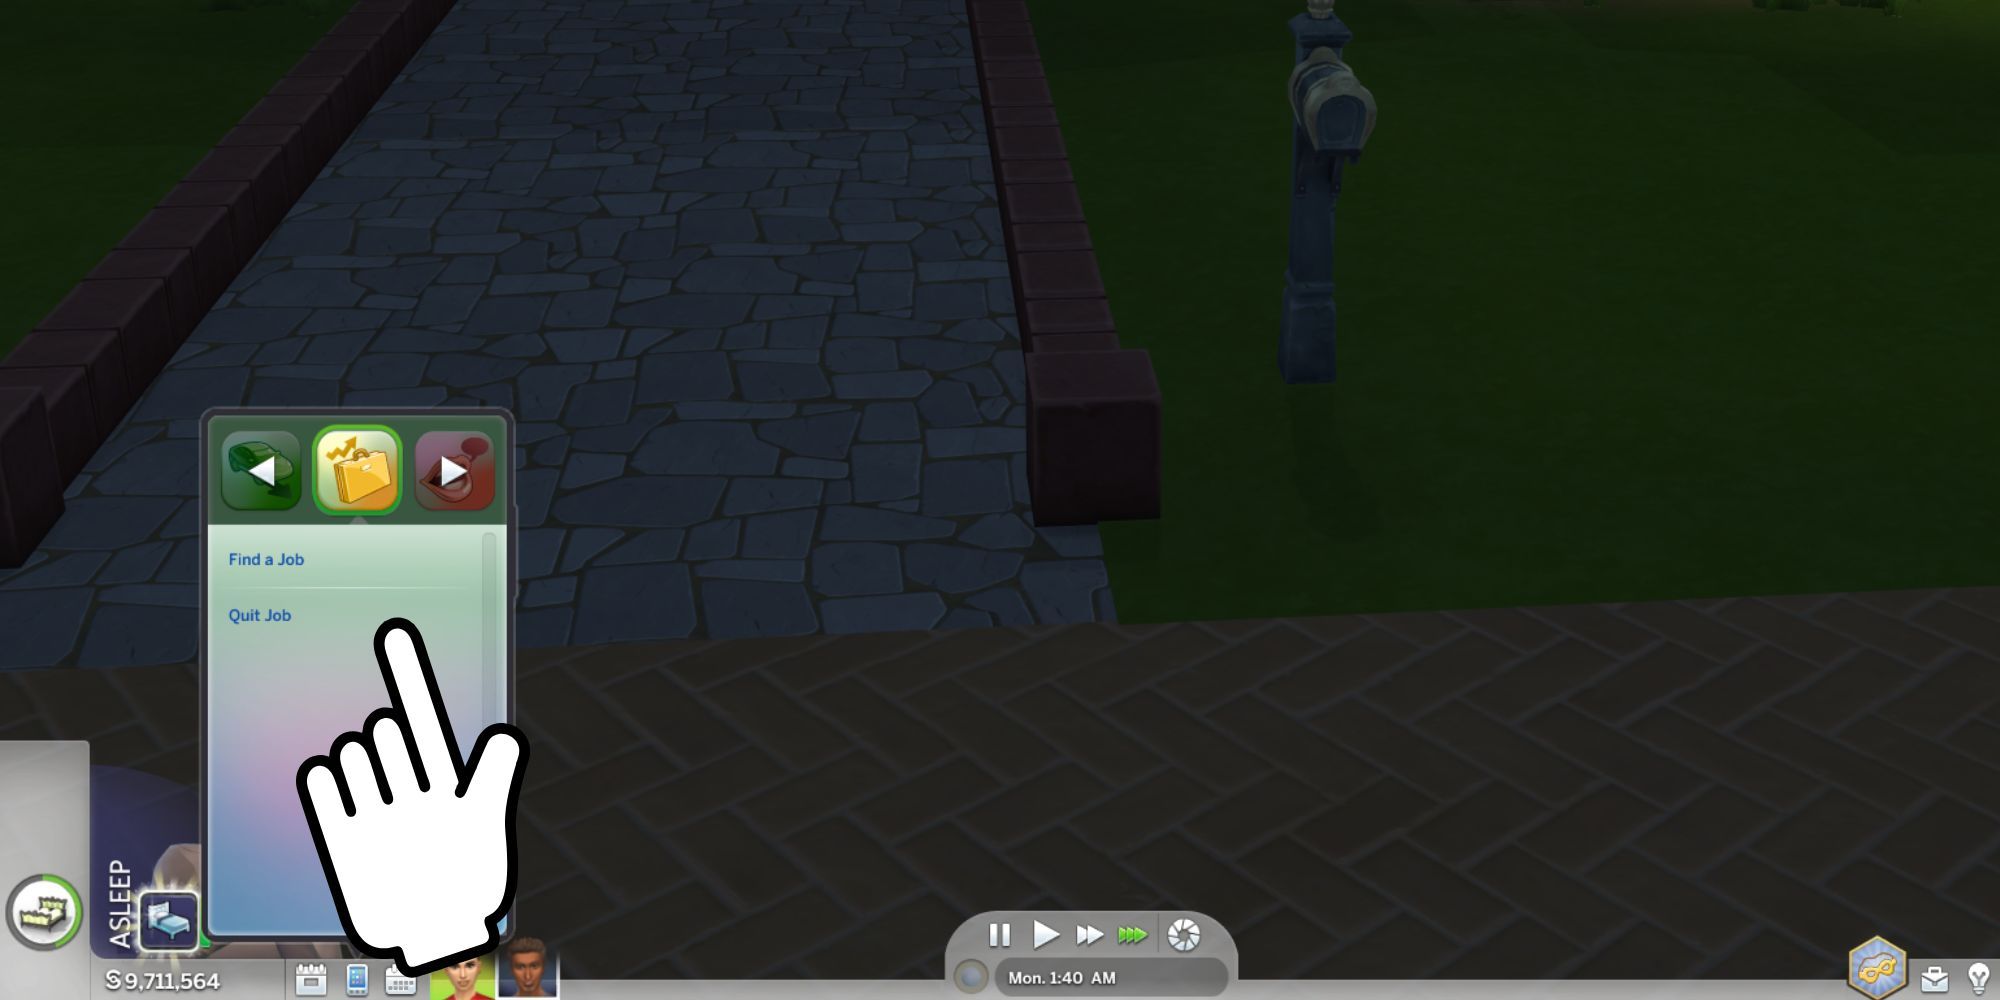 how to quit job in sims 4